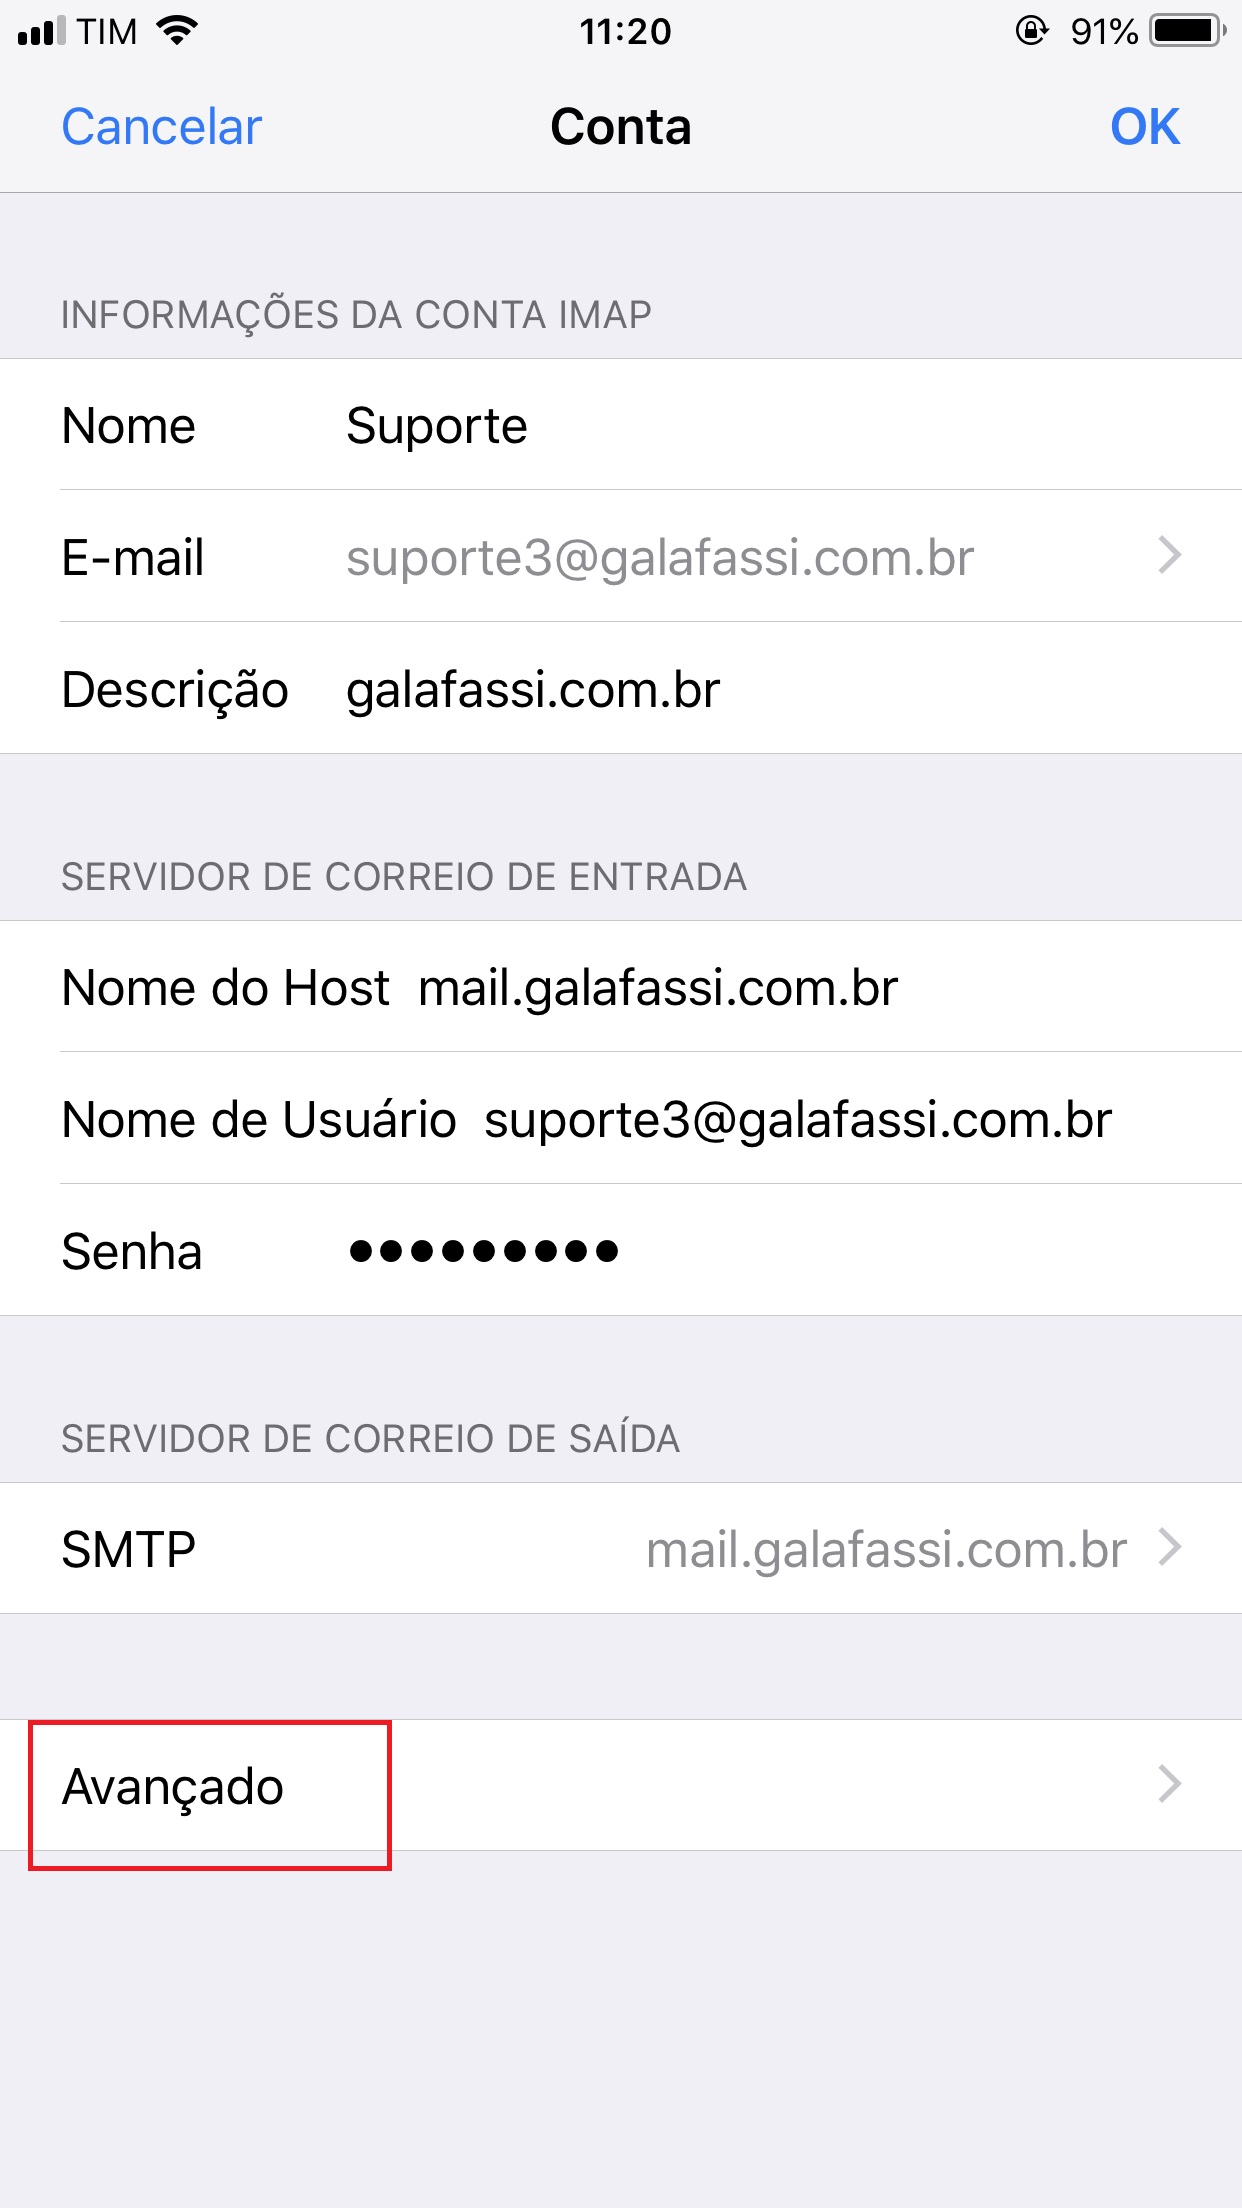 https://gerencial.galafassi.com.br/img_supportkb/iosmail10.jpg